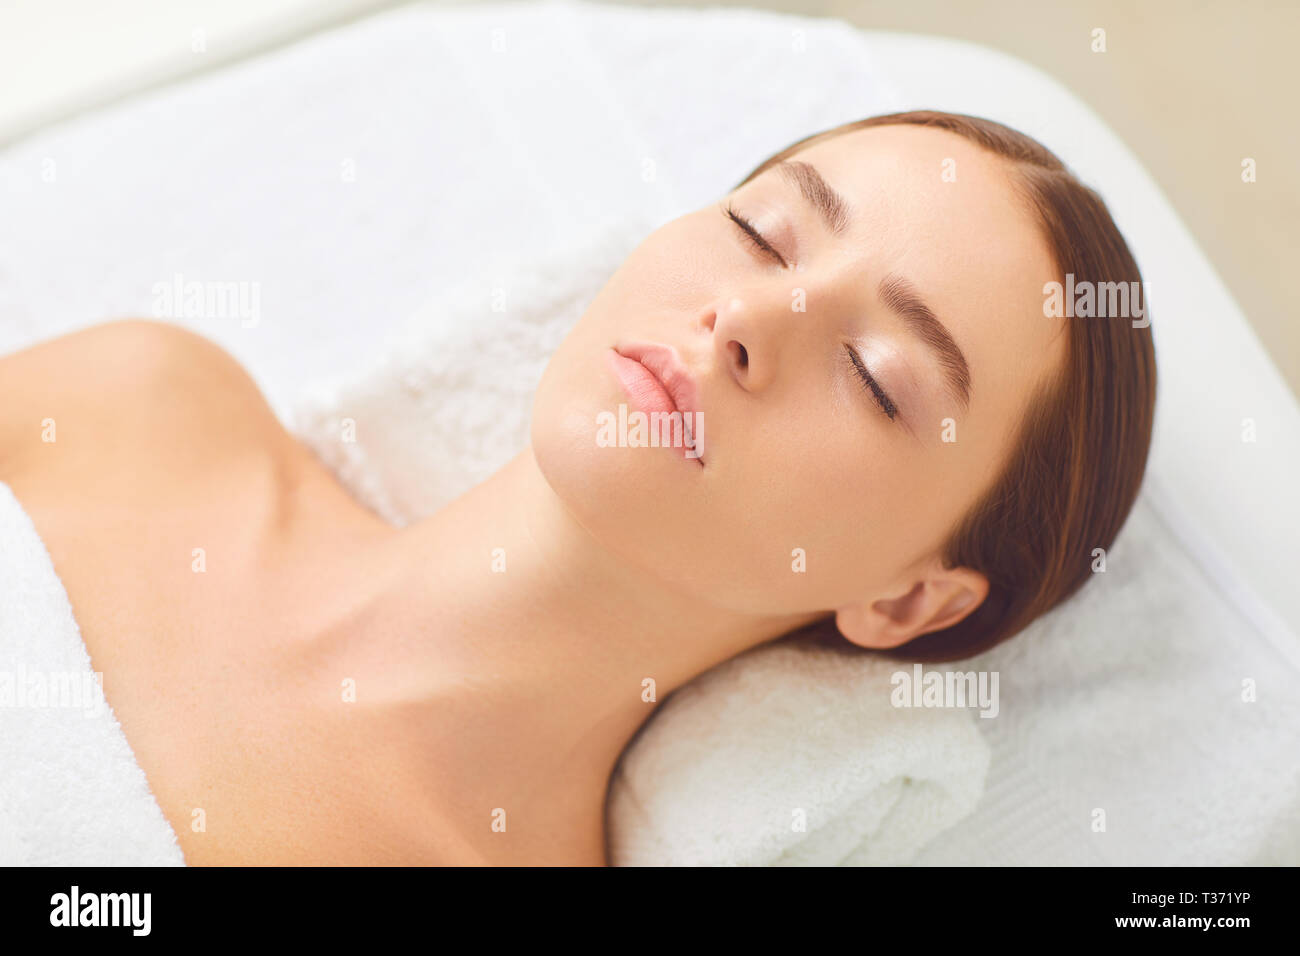 Beauty and spa concept. Brunette girl lying on a massage desk Stock Photo